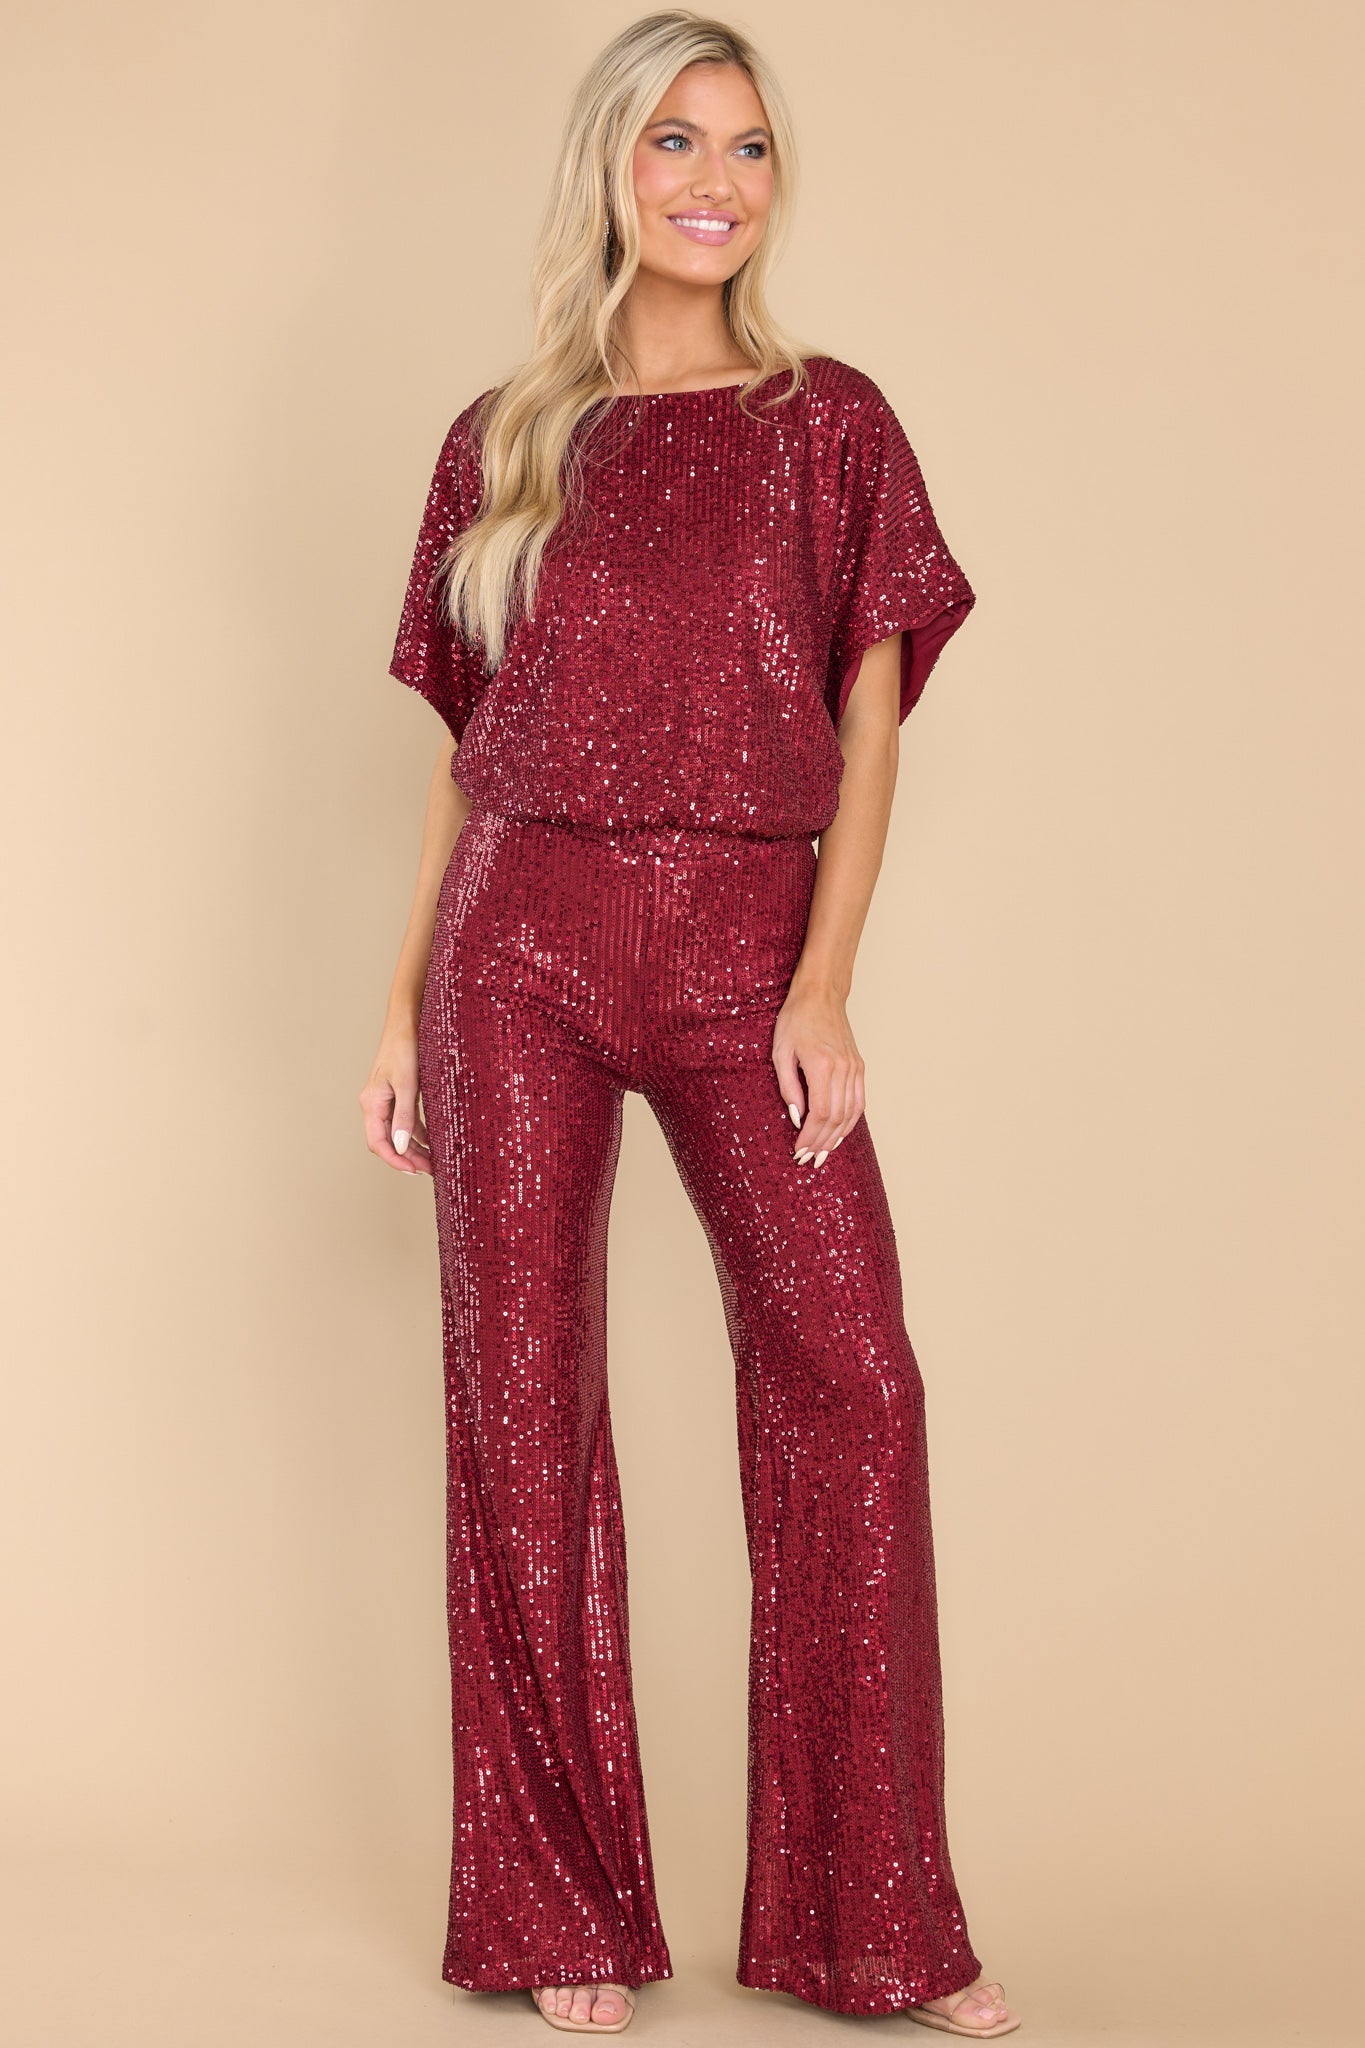 Like A Star Burgundy Sequin Pants - Red Dress